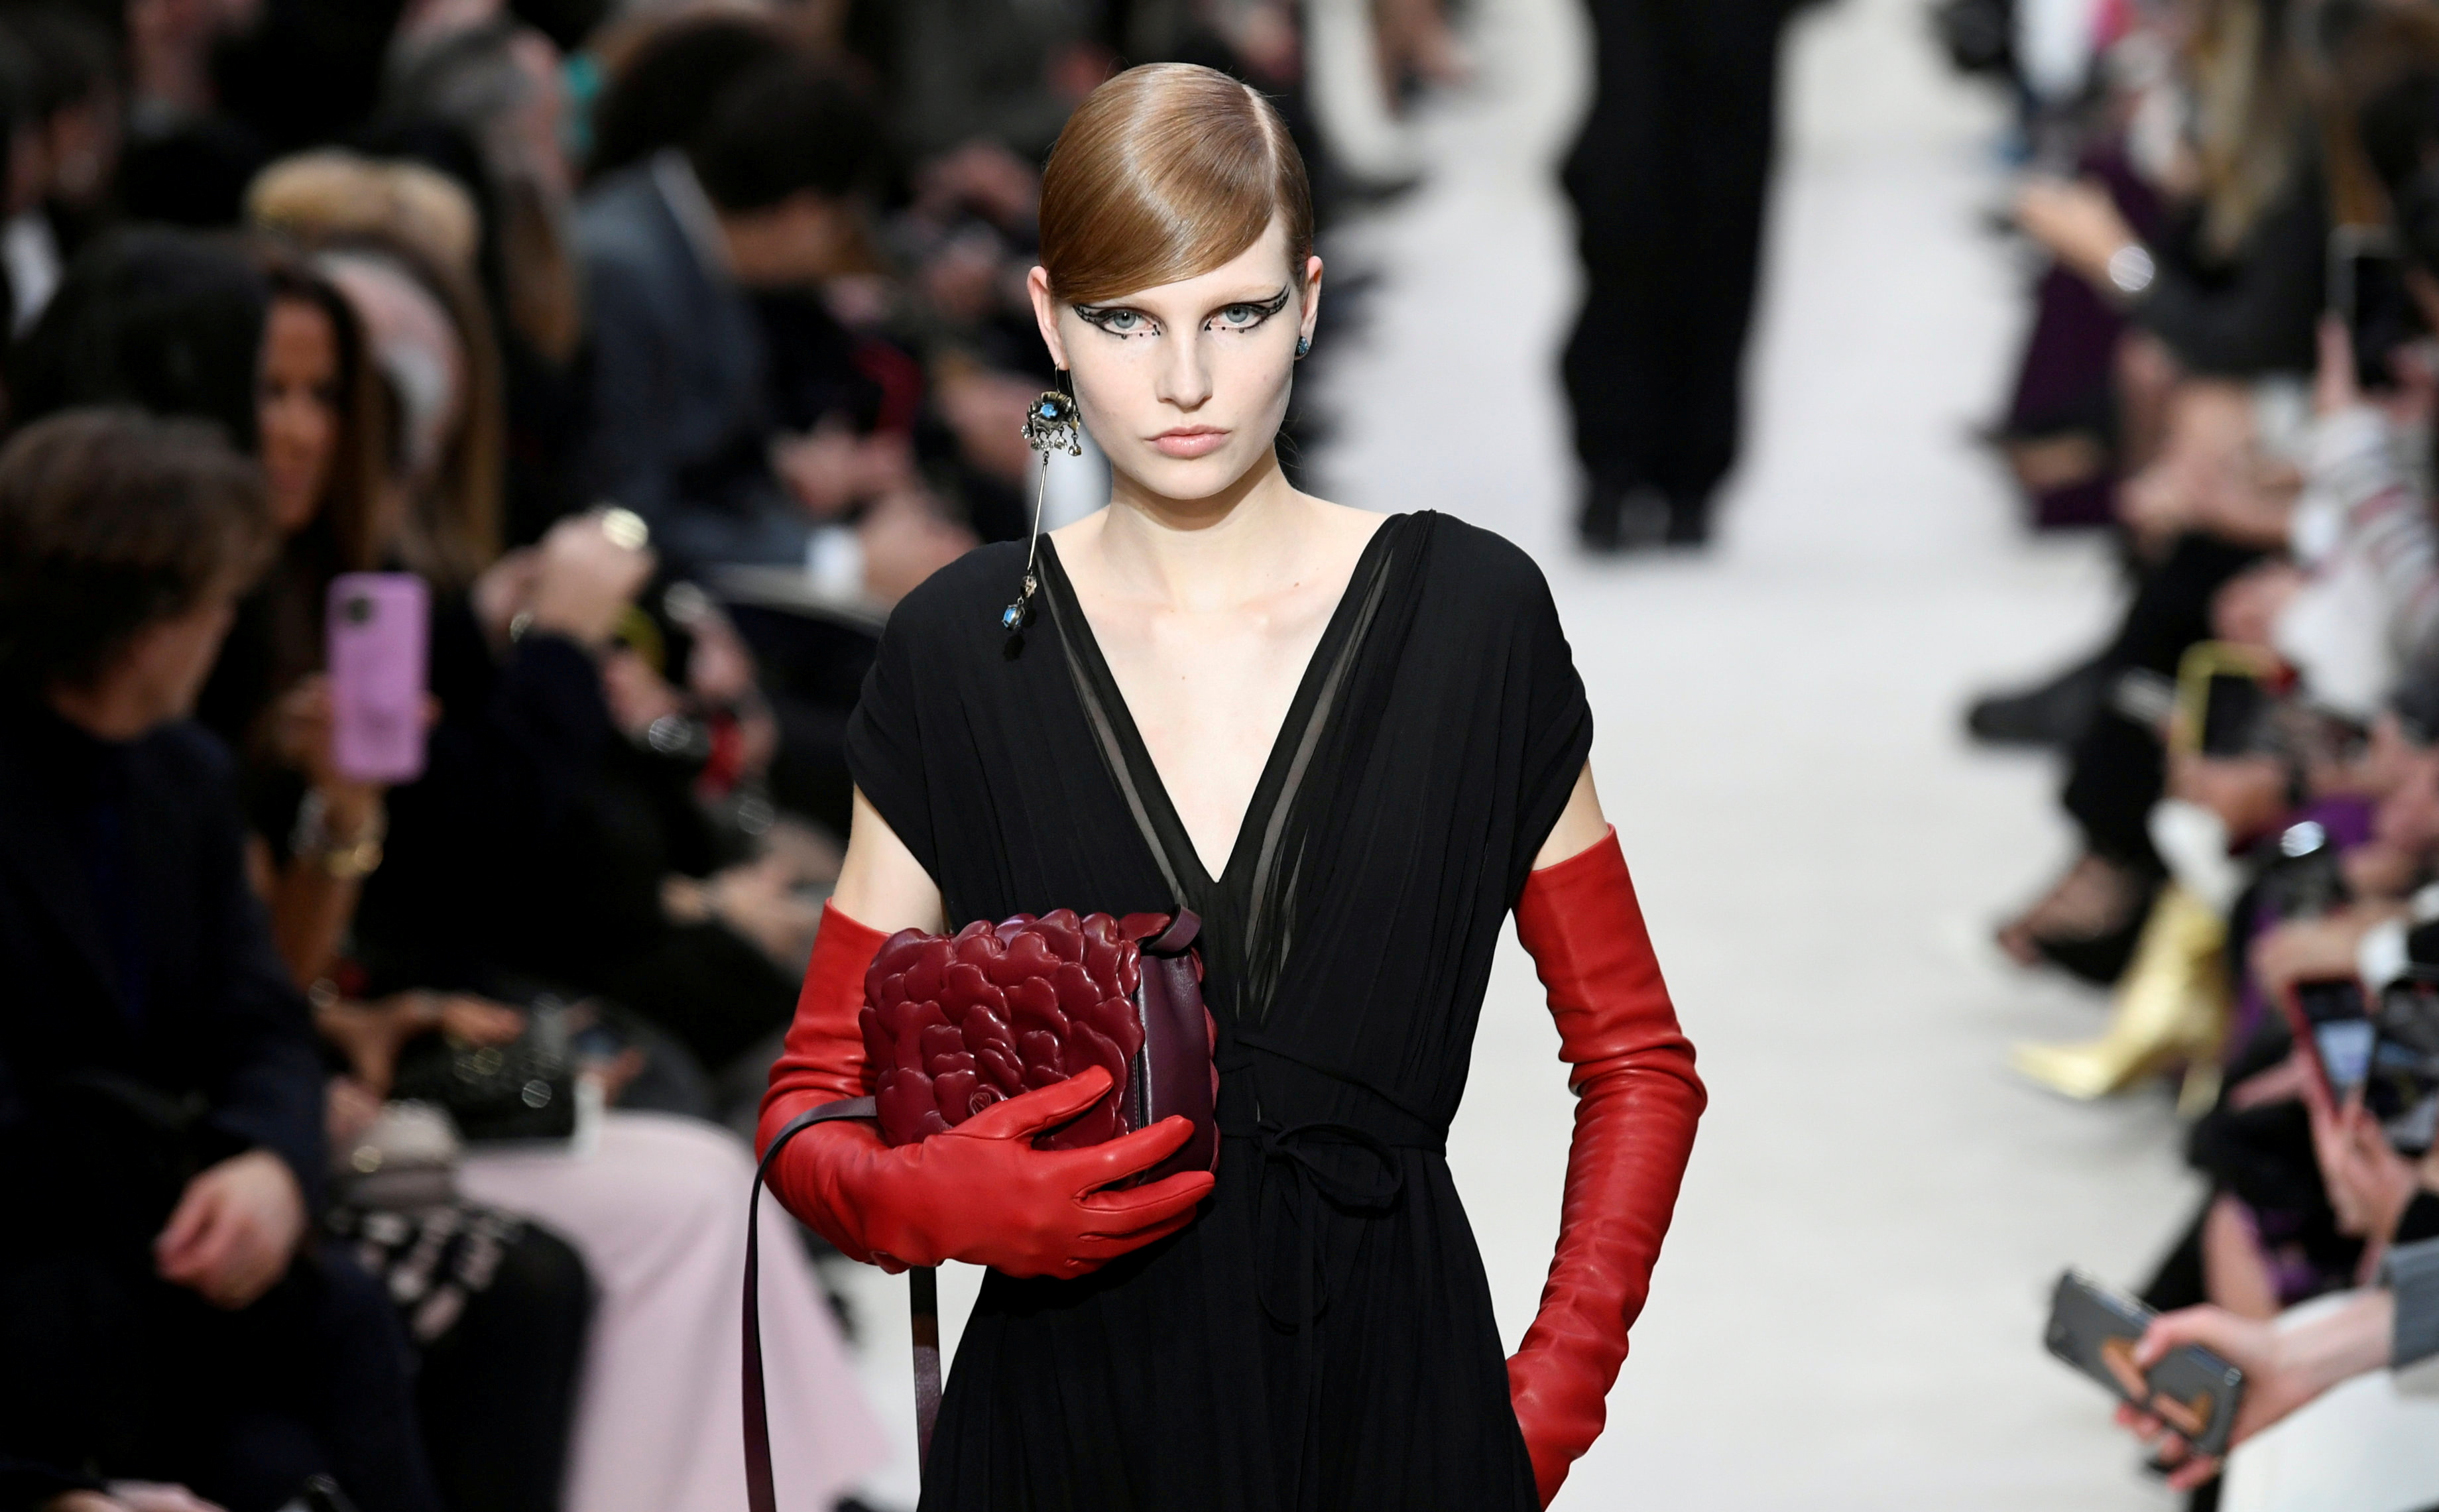 Italy's Valentino bans fur and focuses on its main brand | Reuters